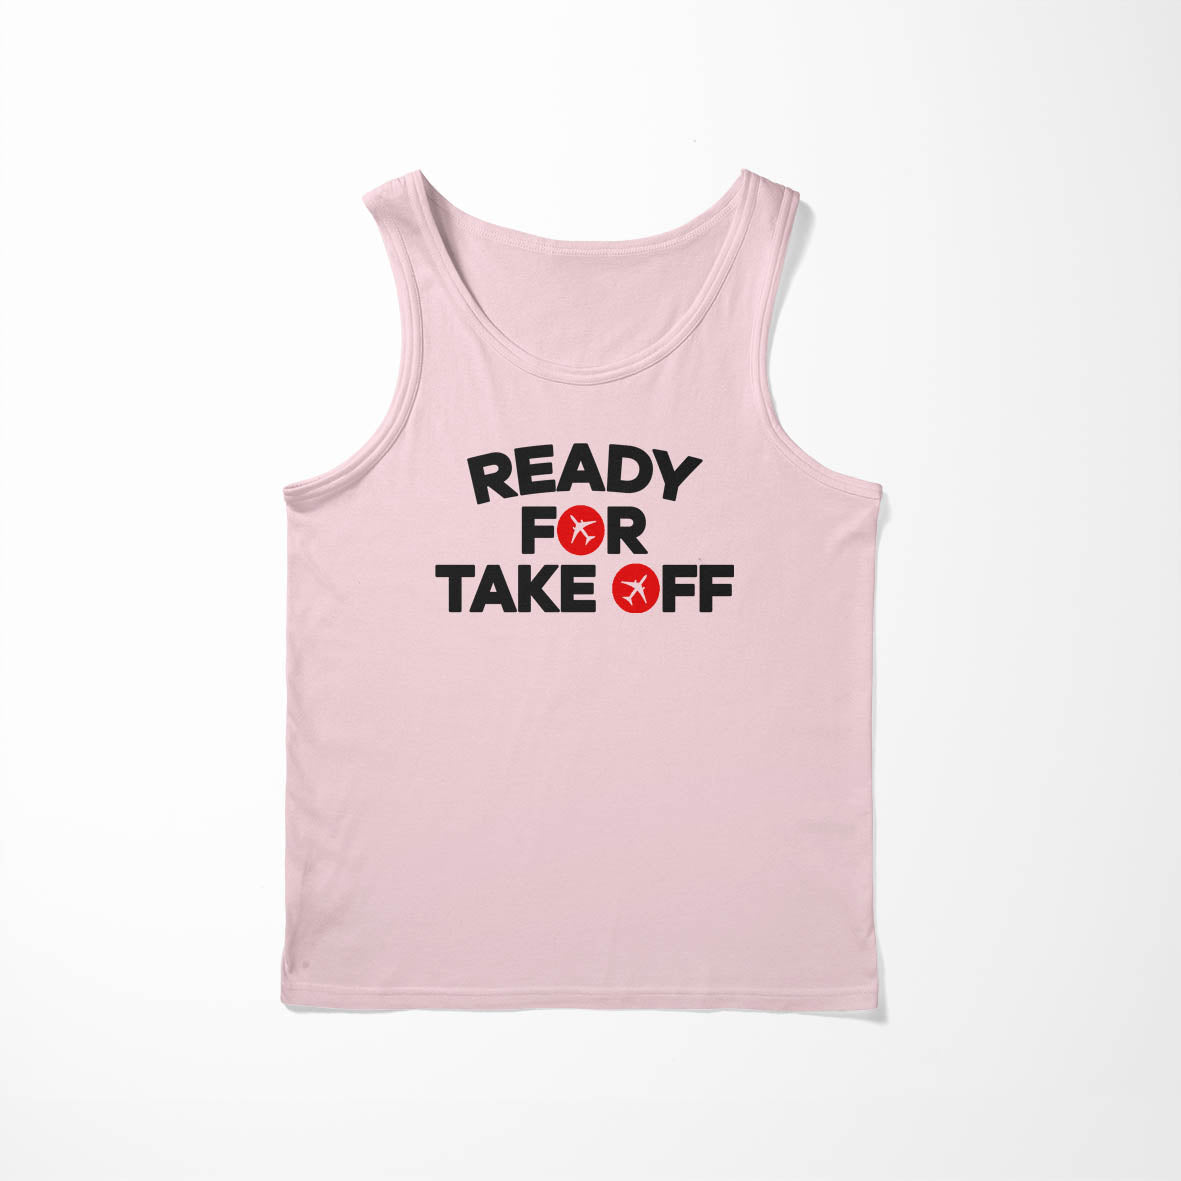 Ready For Takeoff Designed Tank Tops